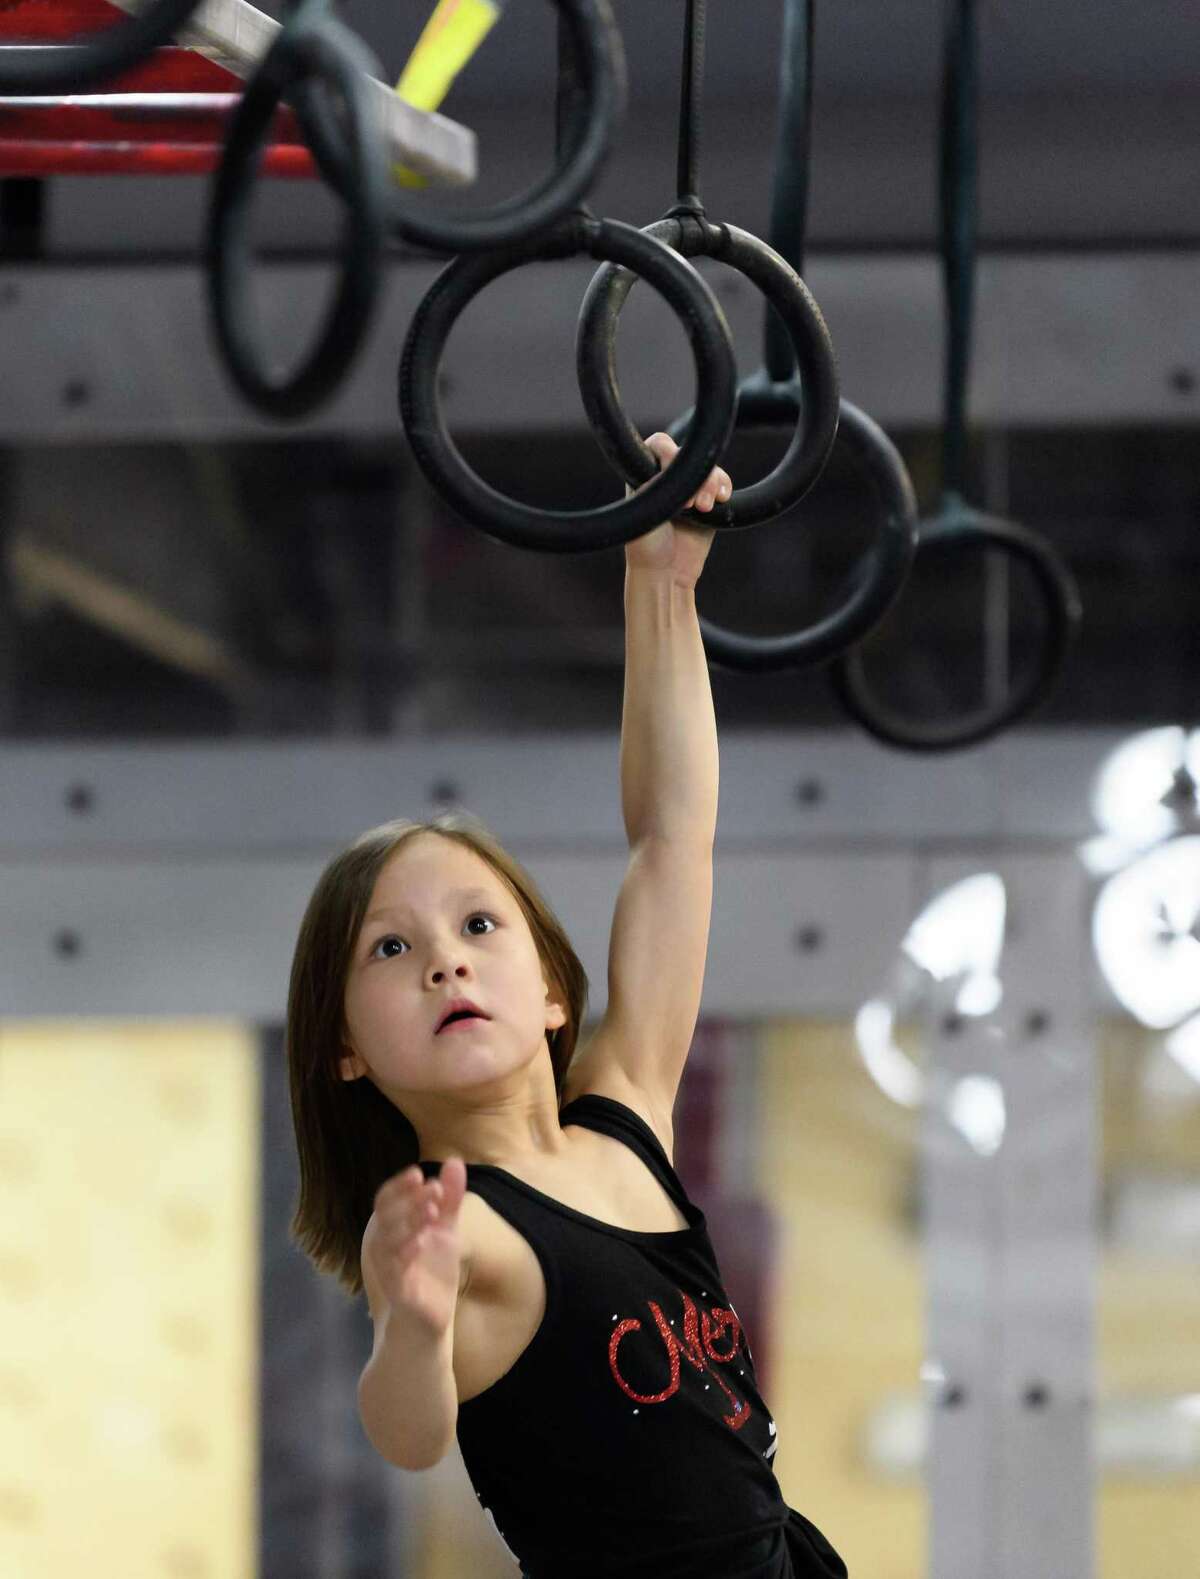 7 year old Maeleigh Kim, Meredith Kim’s younger sister works on the Rings on Friday, March 6, 2020 at Iron Sports in Houston Texas.